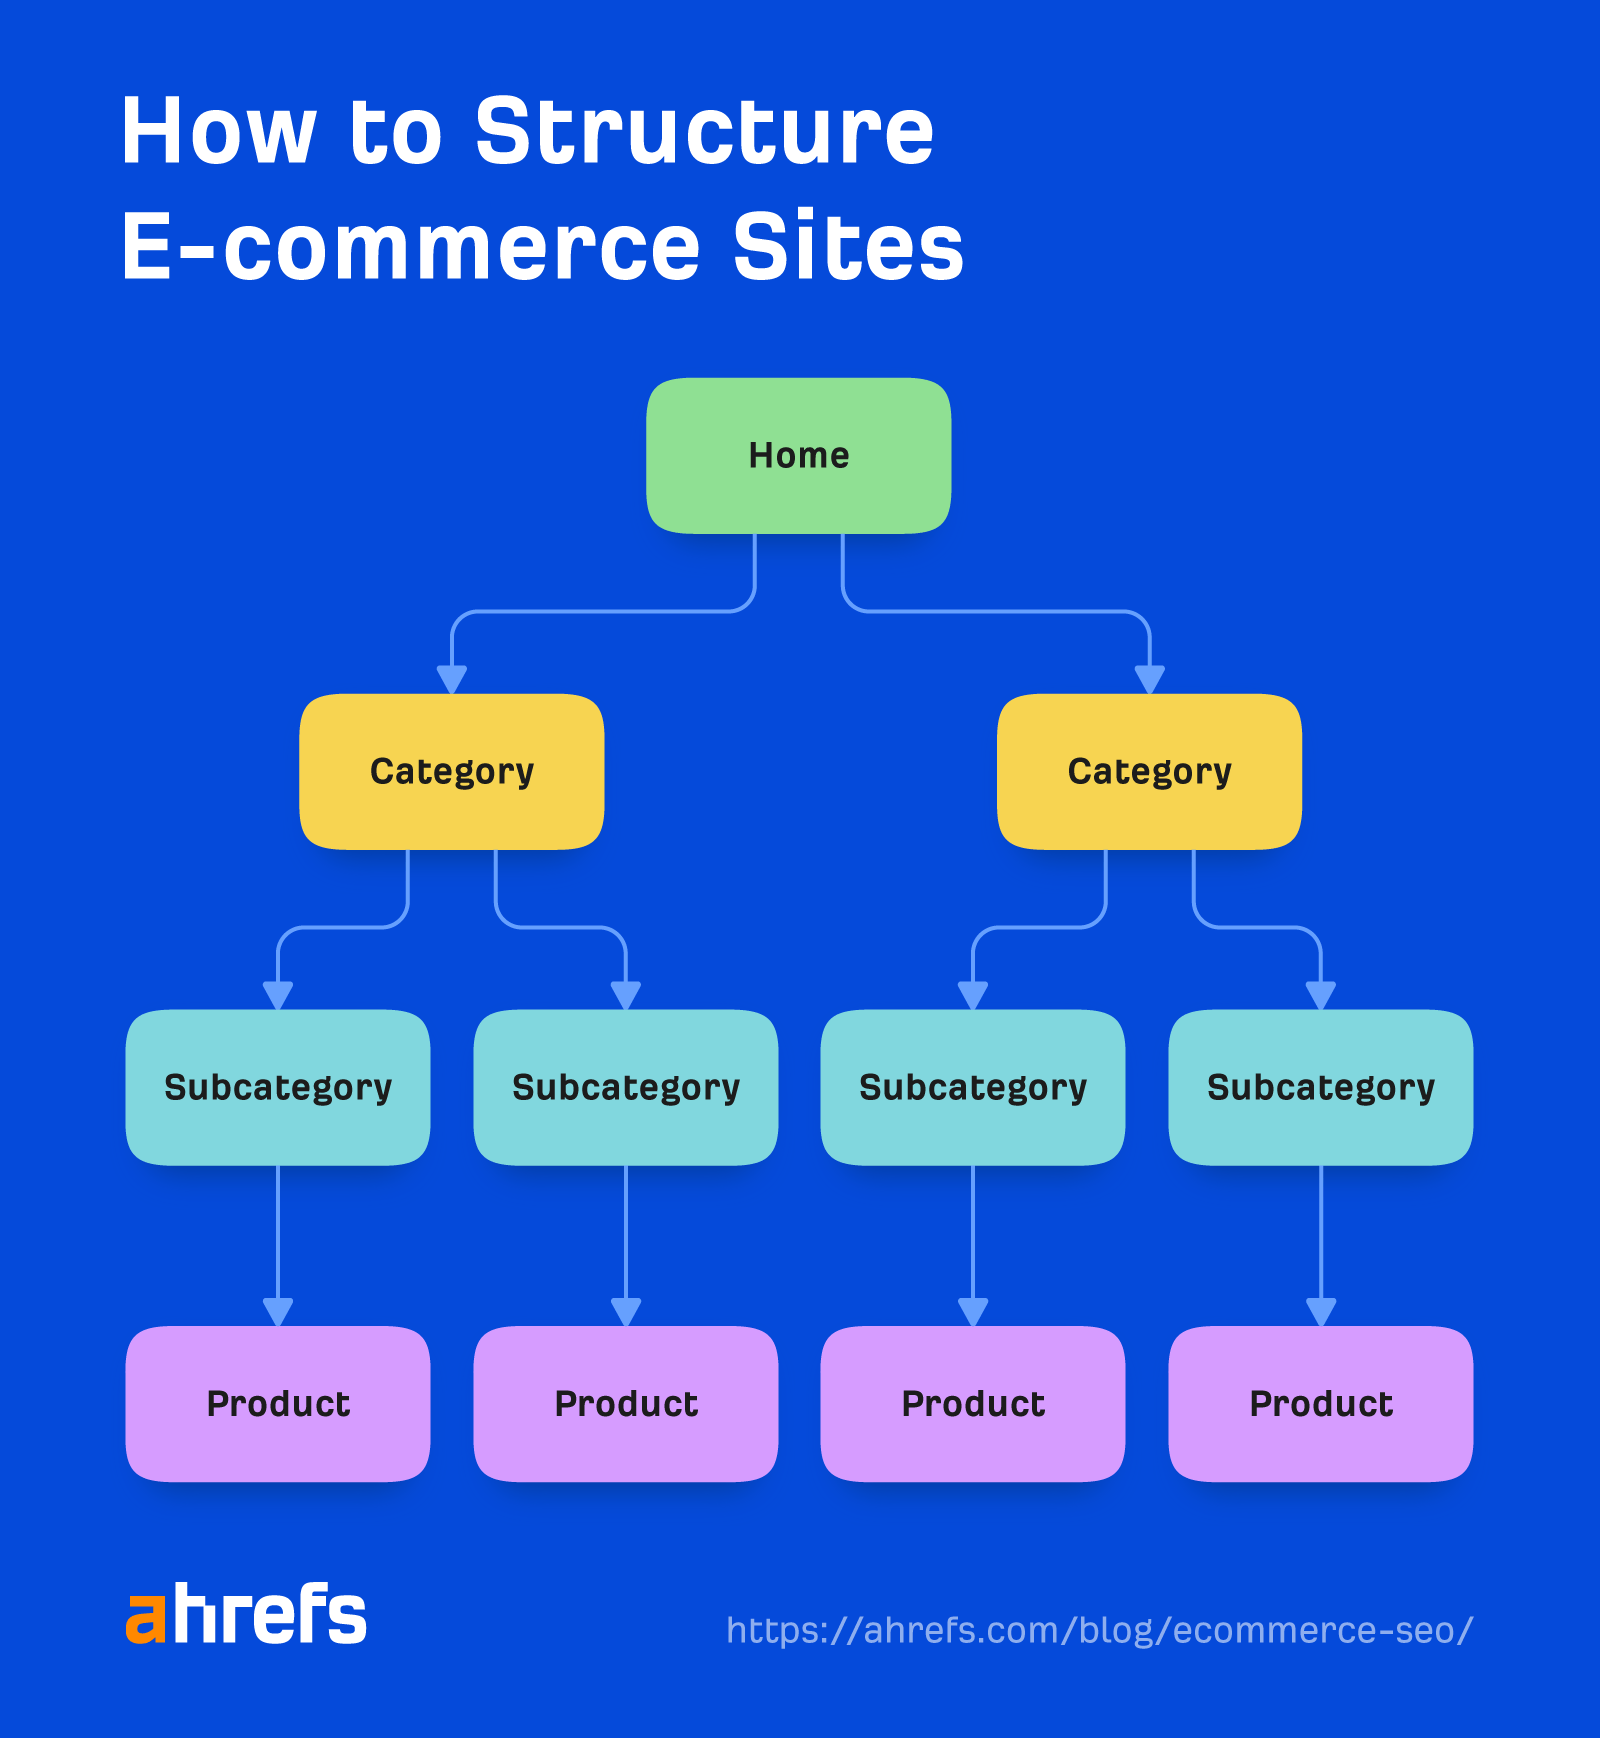 How to structure e-commerce sites
